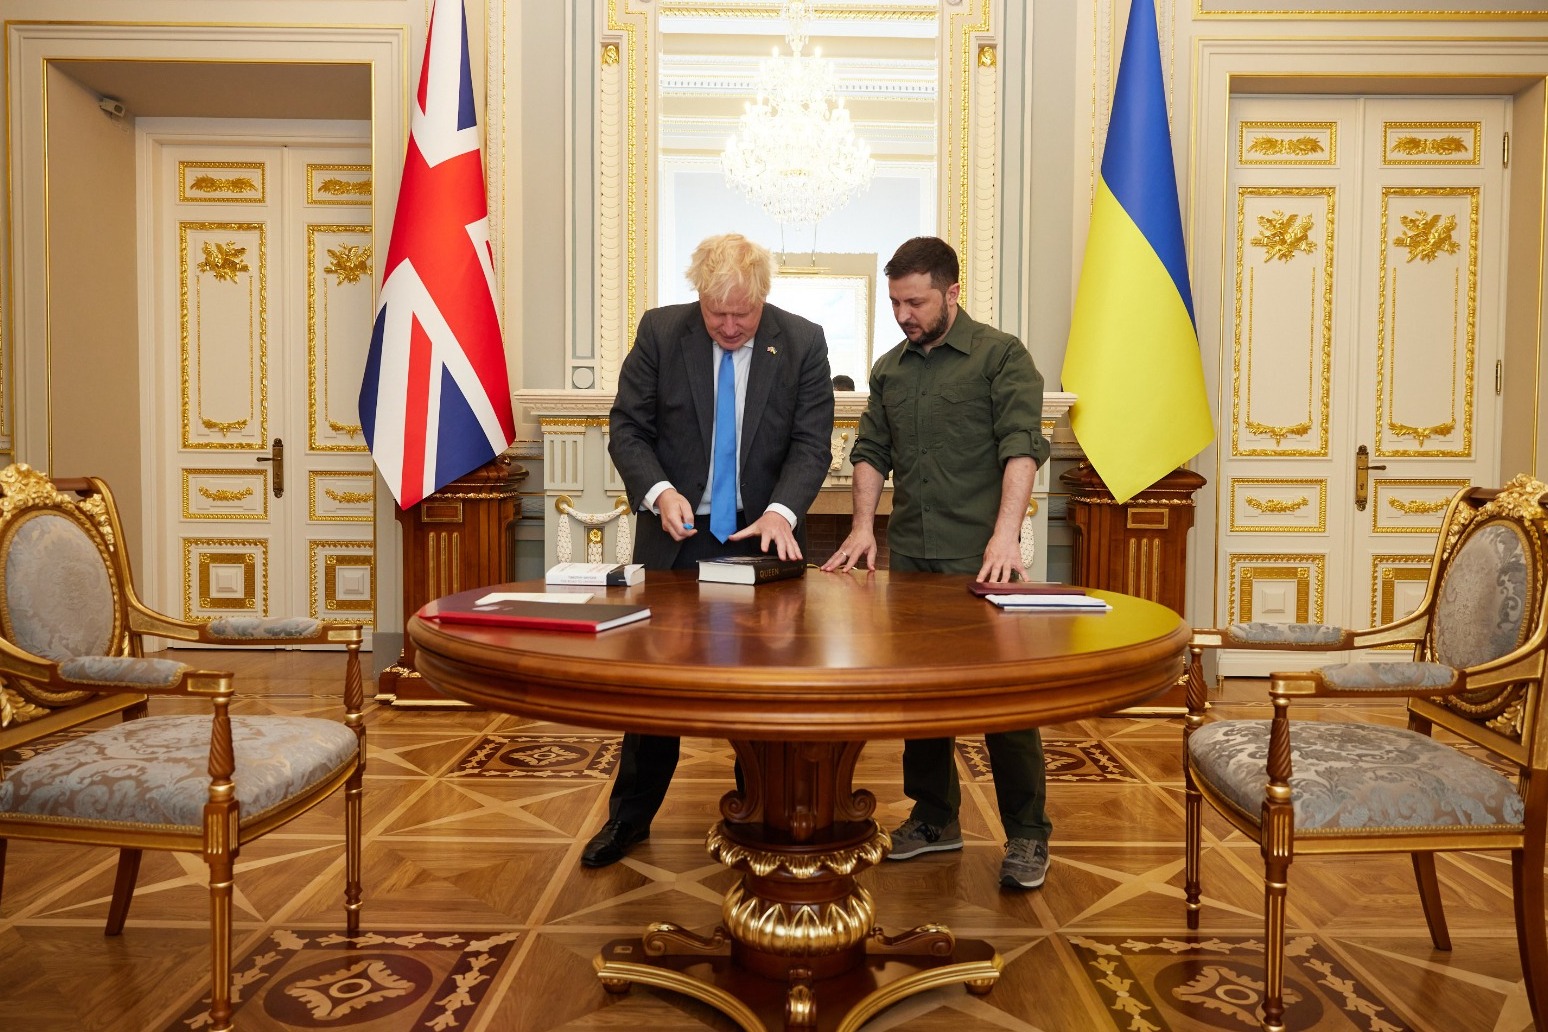 Zelensky appears to be Queen fan as Boris Johnson gives him royal biography 